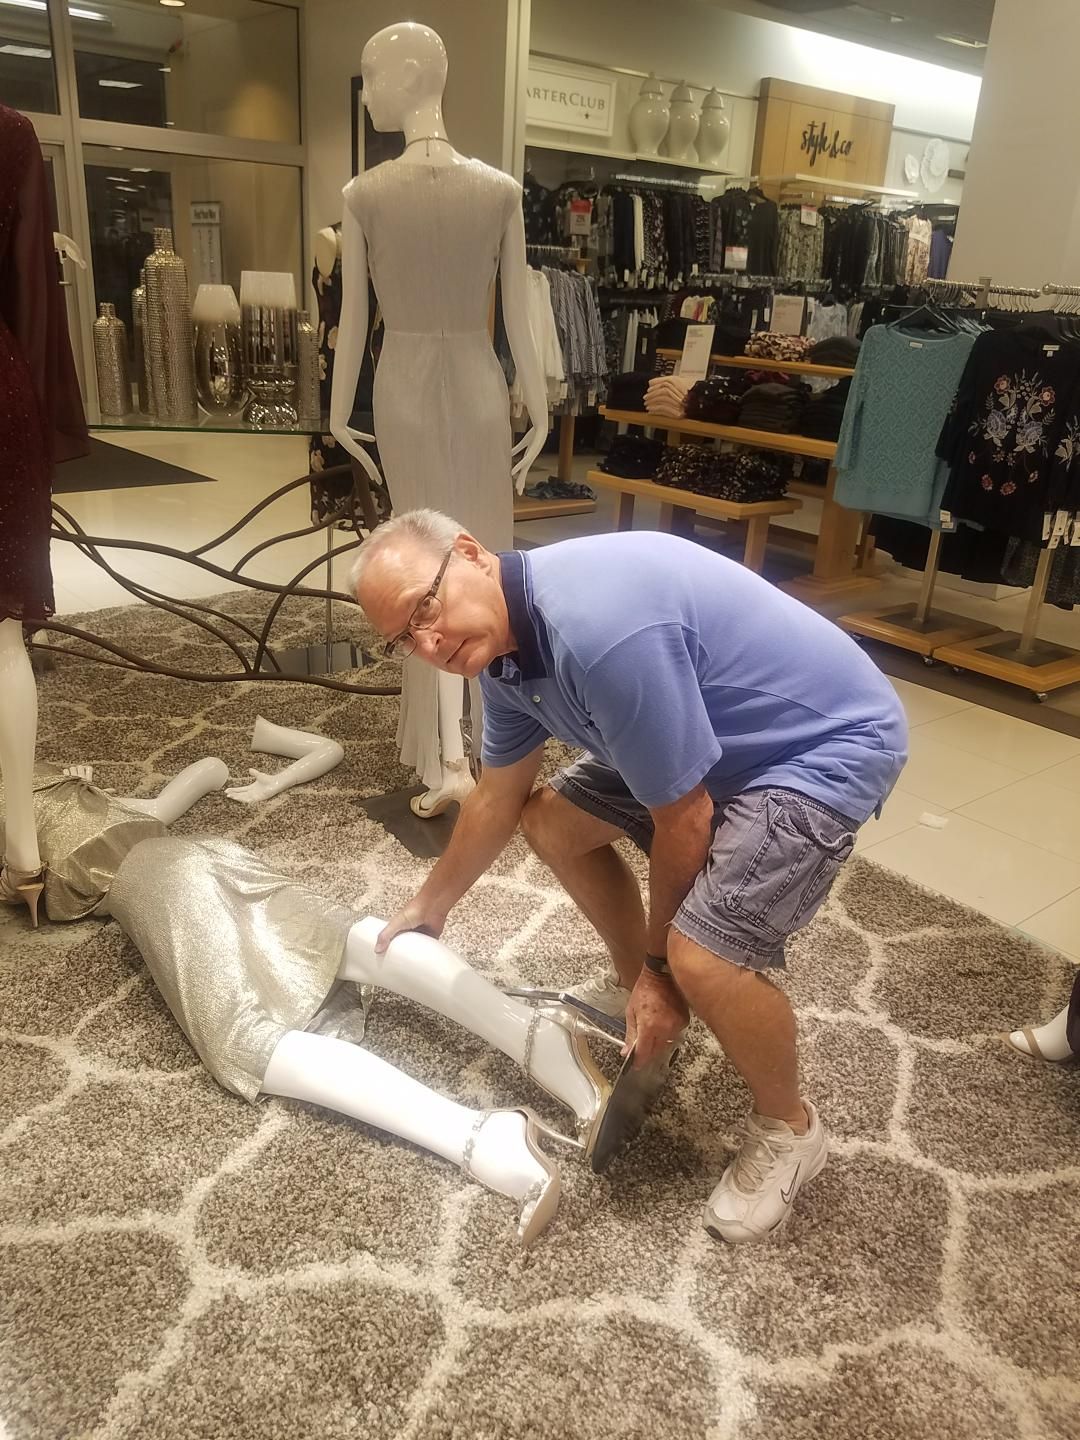 Dad knocked over a mannequin